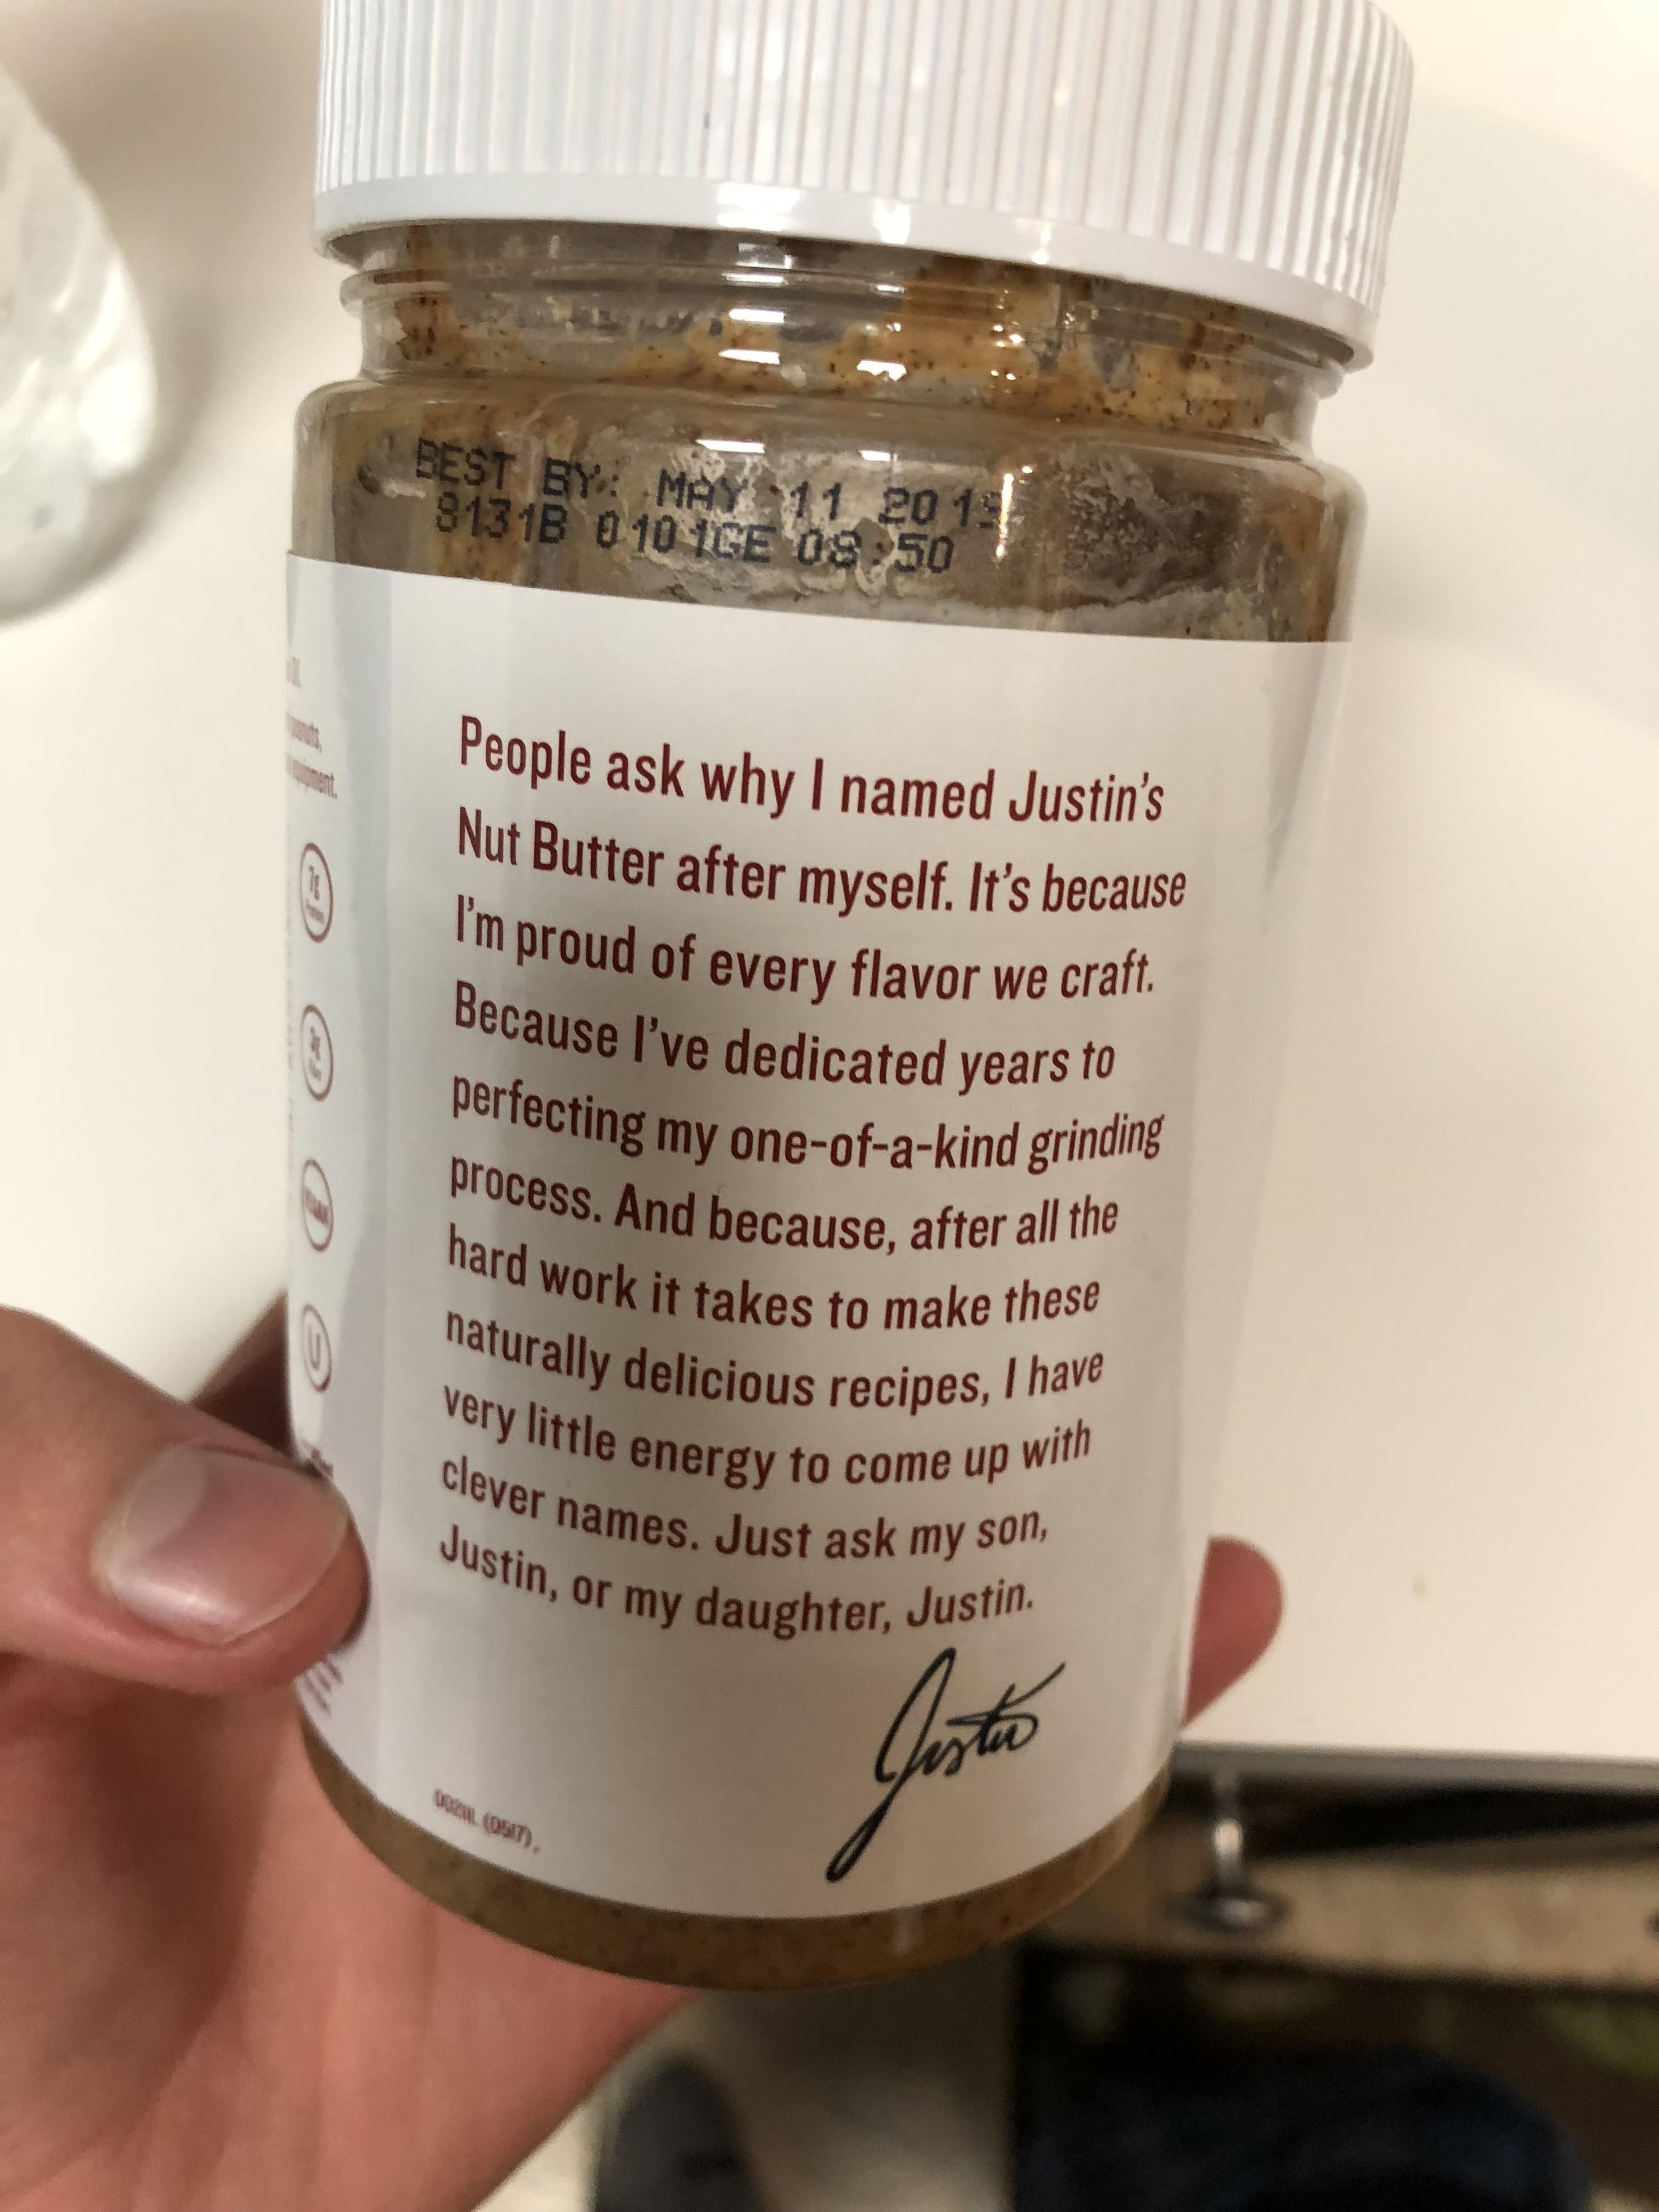 Justin explains the name behind his Nut Butter